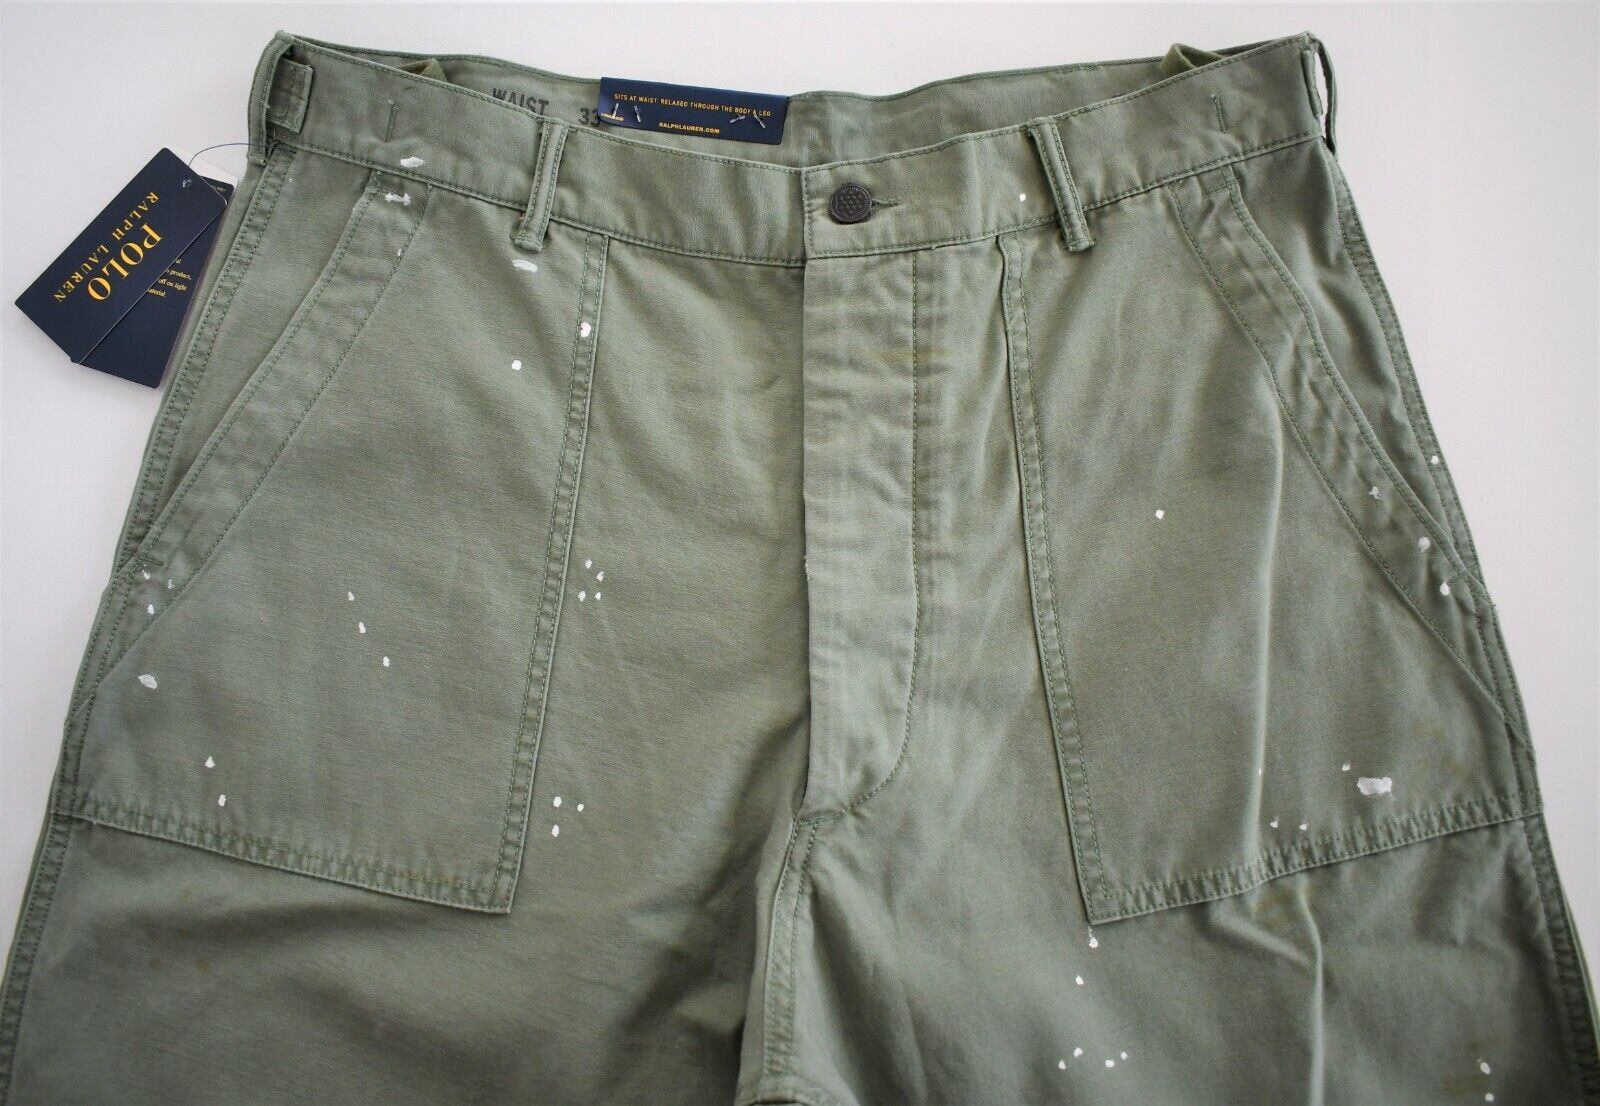 NEW POLO RALPH LAUREN Olive Cotton DISTRESSED ARMY UTILITY Pants 33x30